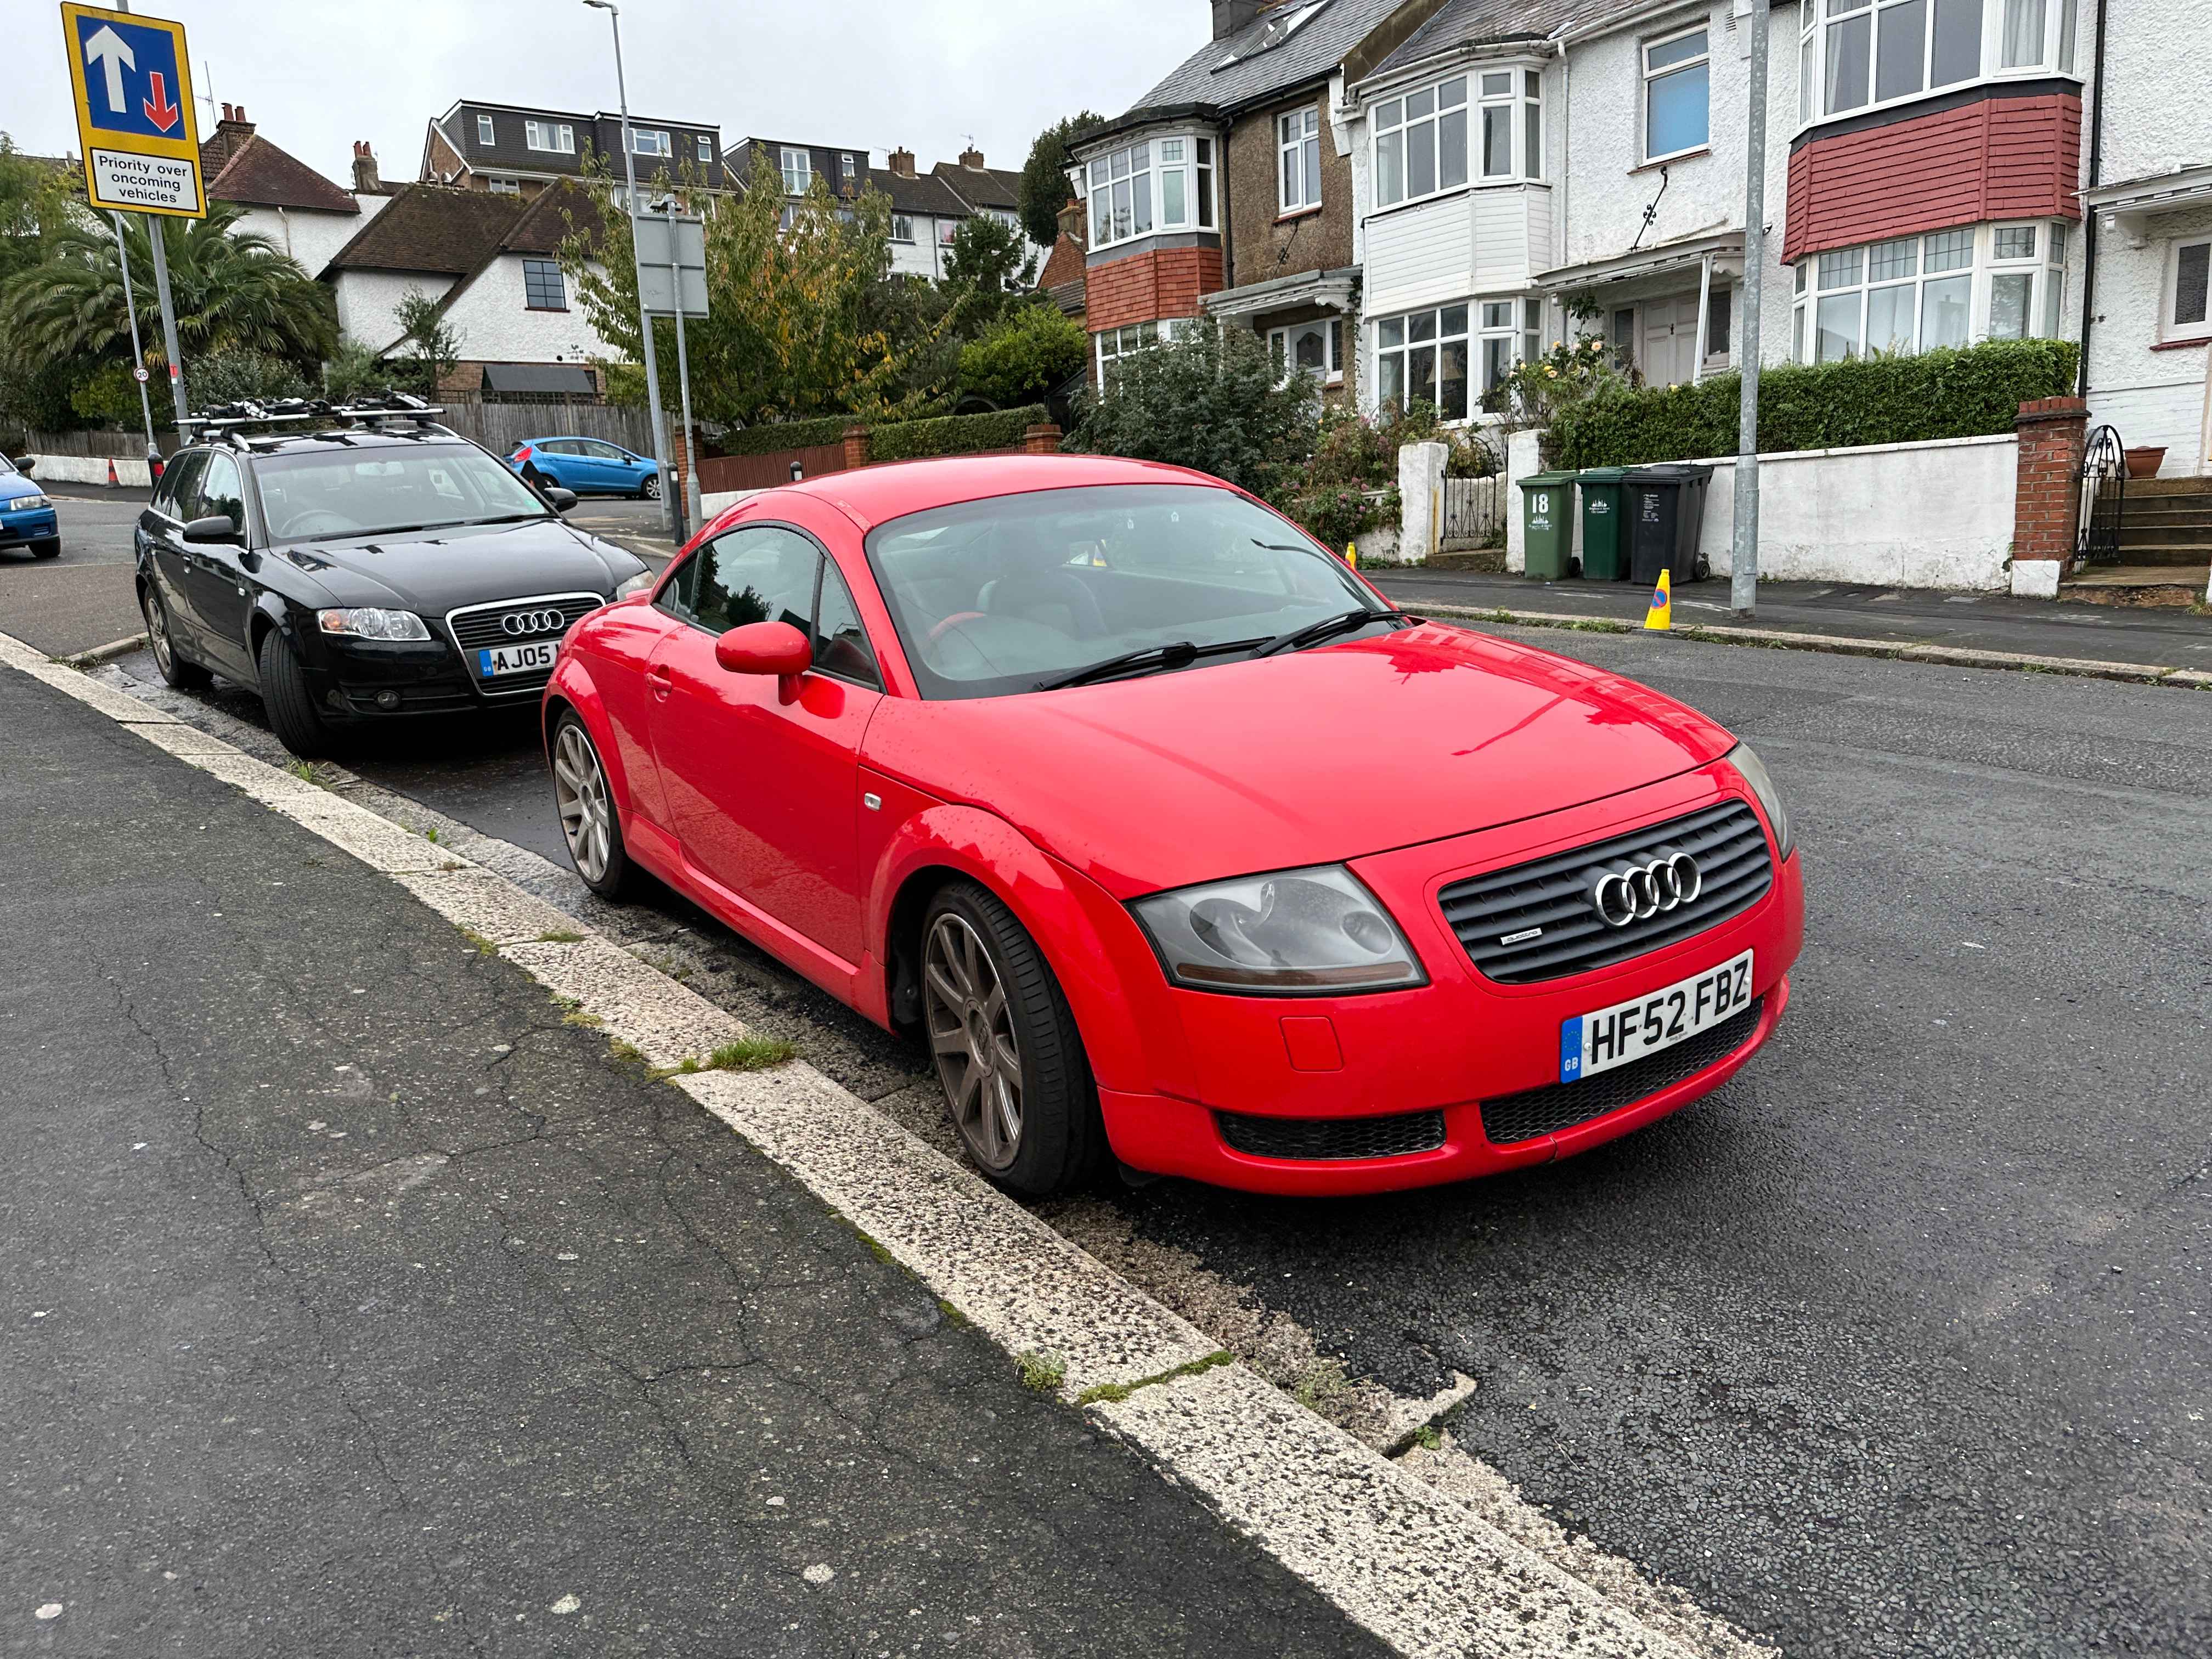 Photograph of HF52 FBZ - a Red Audi TT parked in Hollingdean by a non-resident, and potentially abandoned. The first of two photographs supplied by the residents of Hollingdean.